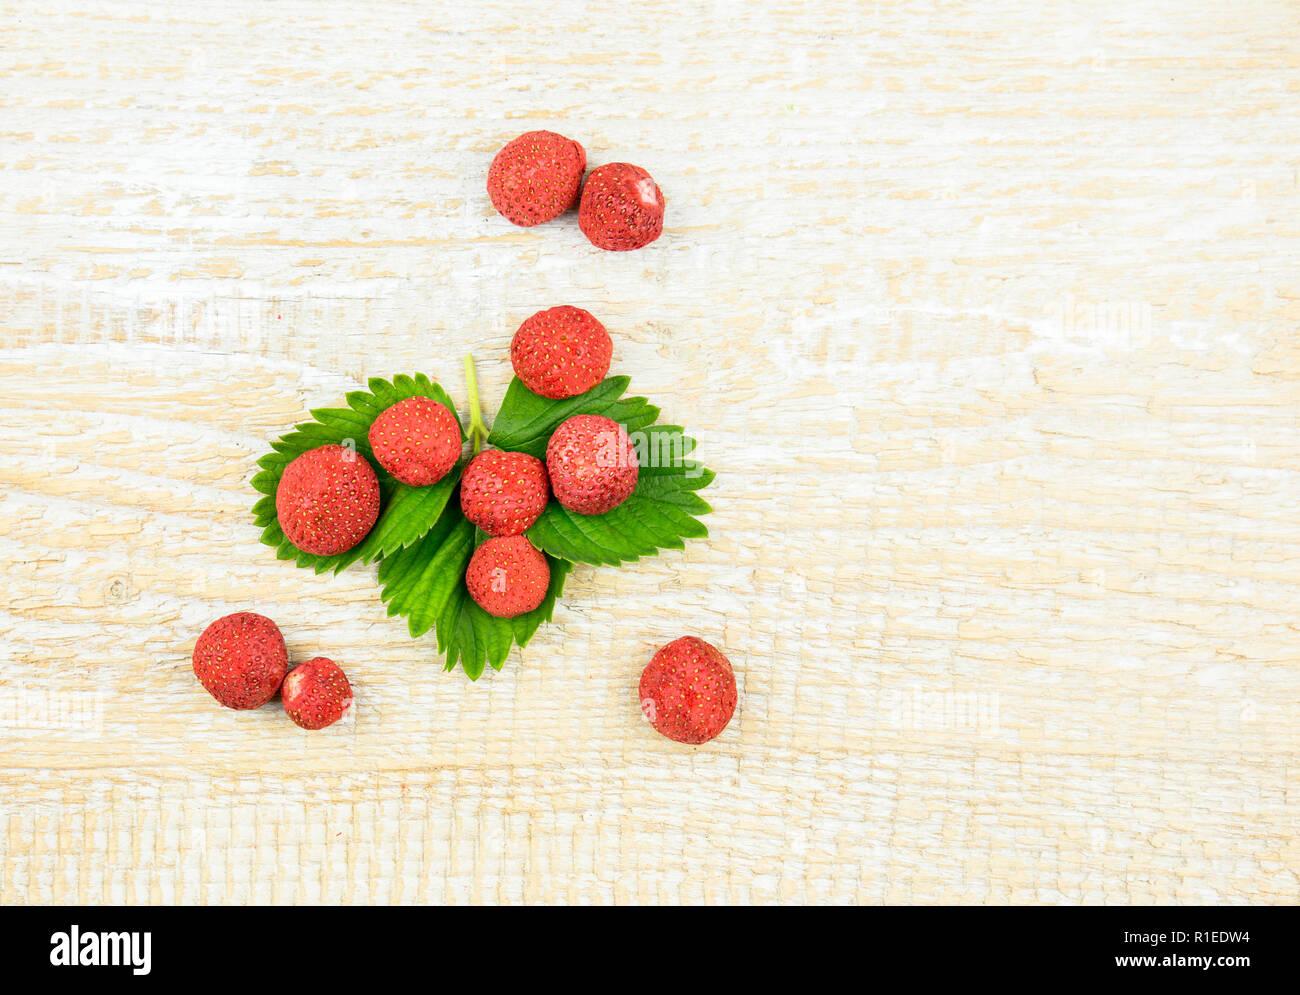 Freeze dried whole and pieces of strawberries on green strawberry leaf, healthy snack full of vitamins and nutrition on natural wooden background. Stock Photo